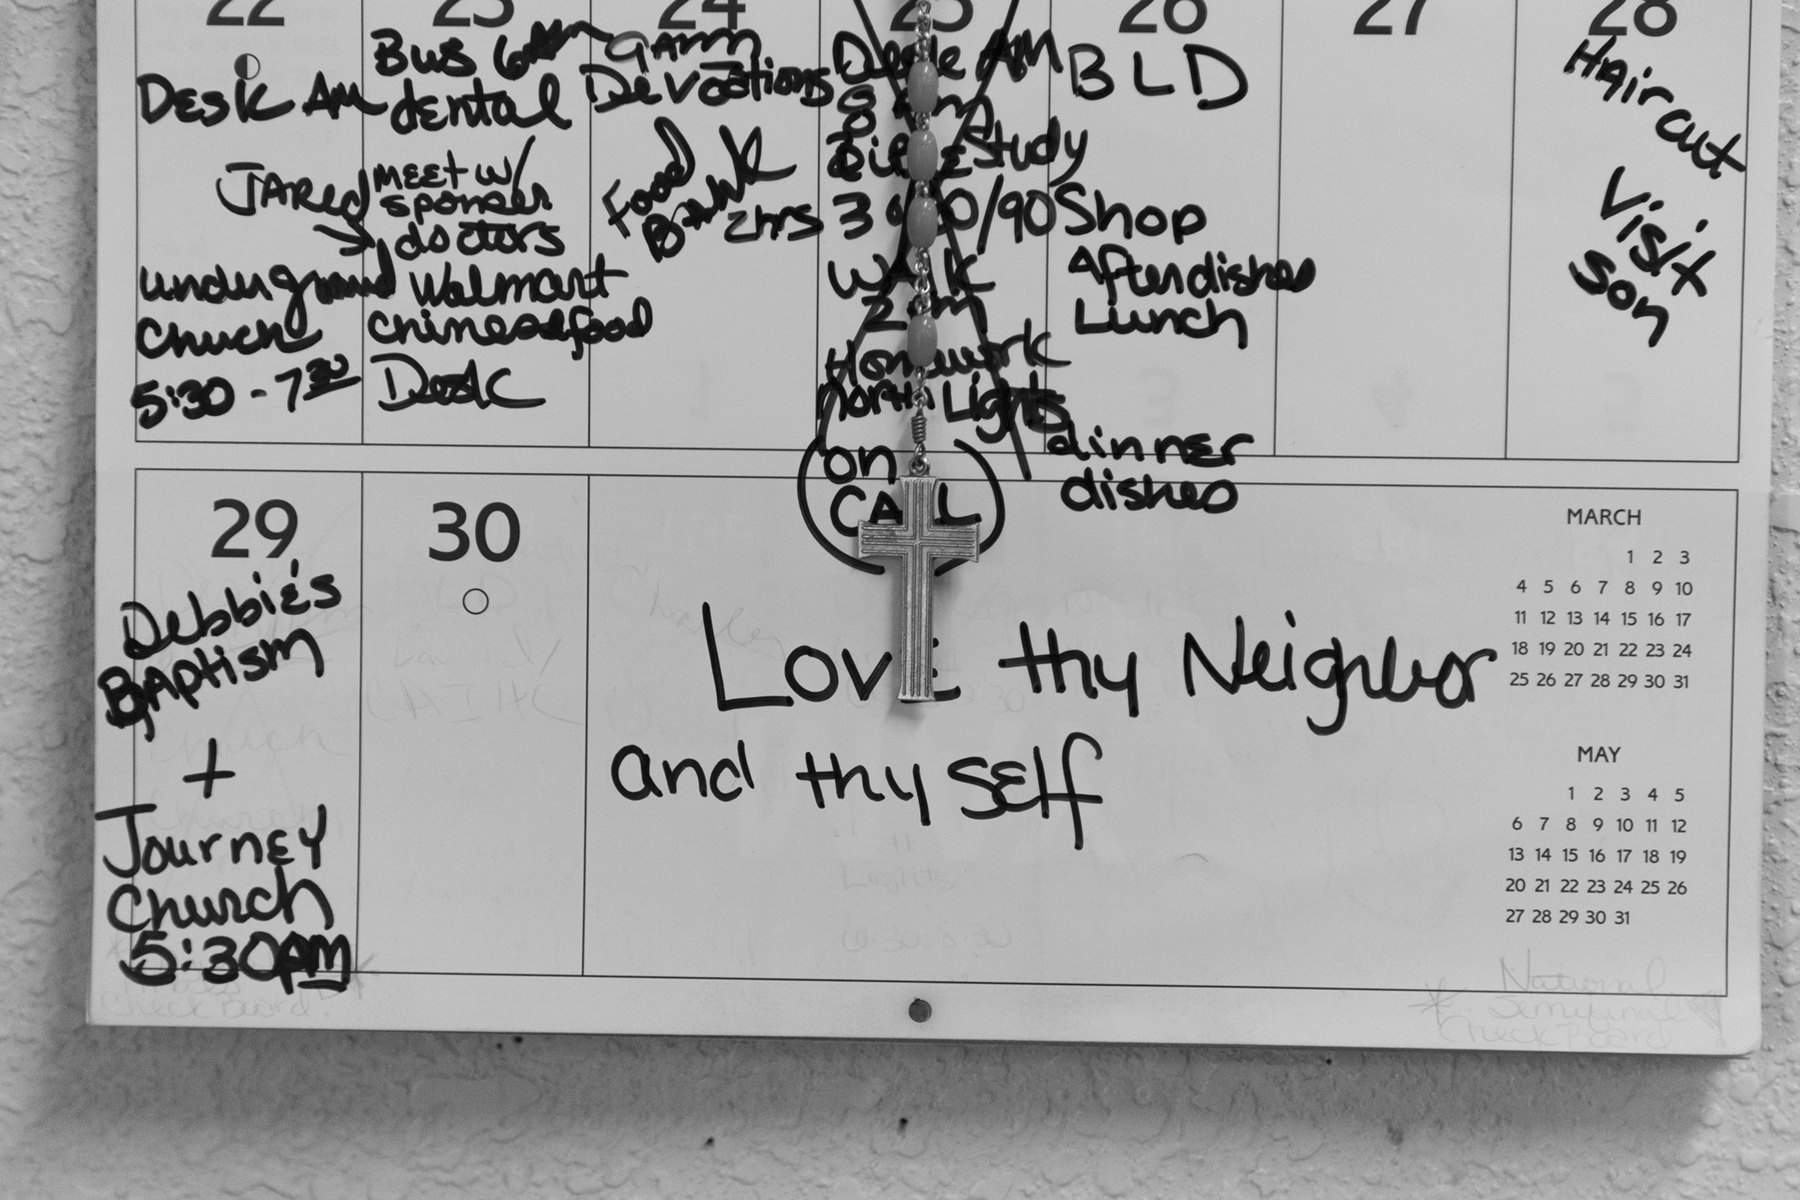 Felicia Cavanaugh’s April calendar hangs on her wall beside her bed along with her rosary and a written reminder from the bible to “Love thy neighbor and thy self,” on April 28th 2018. Courtesy of the artist